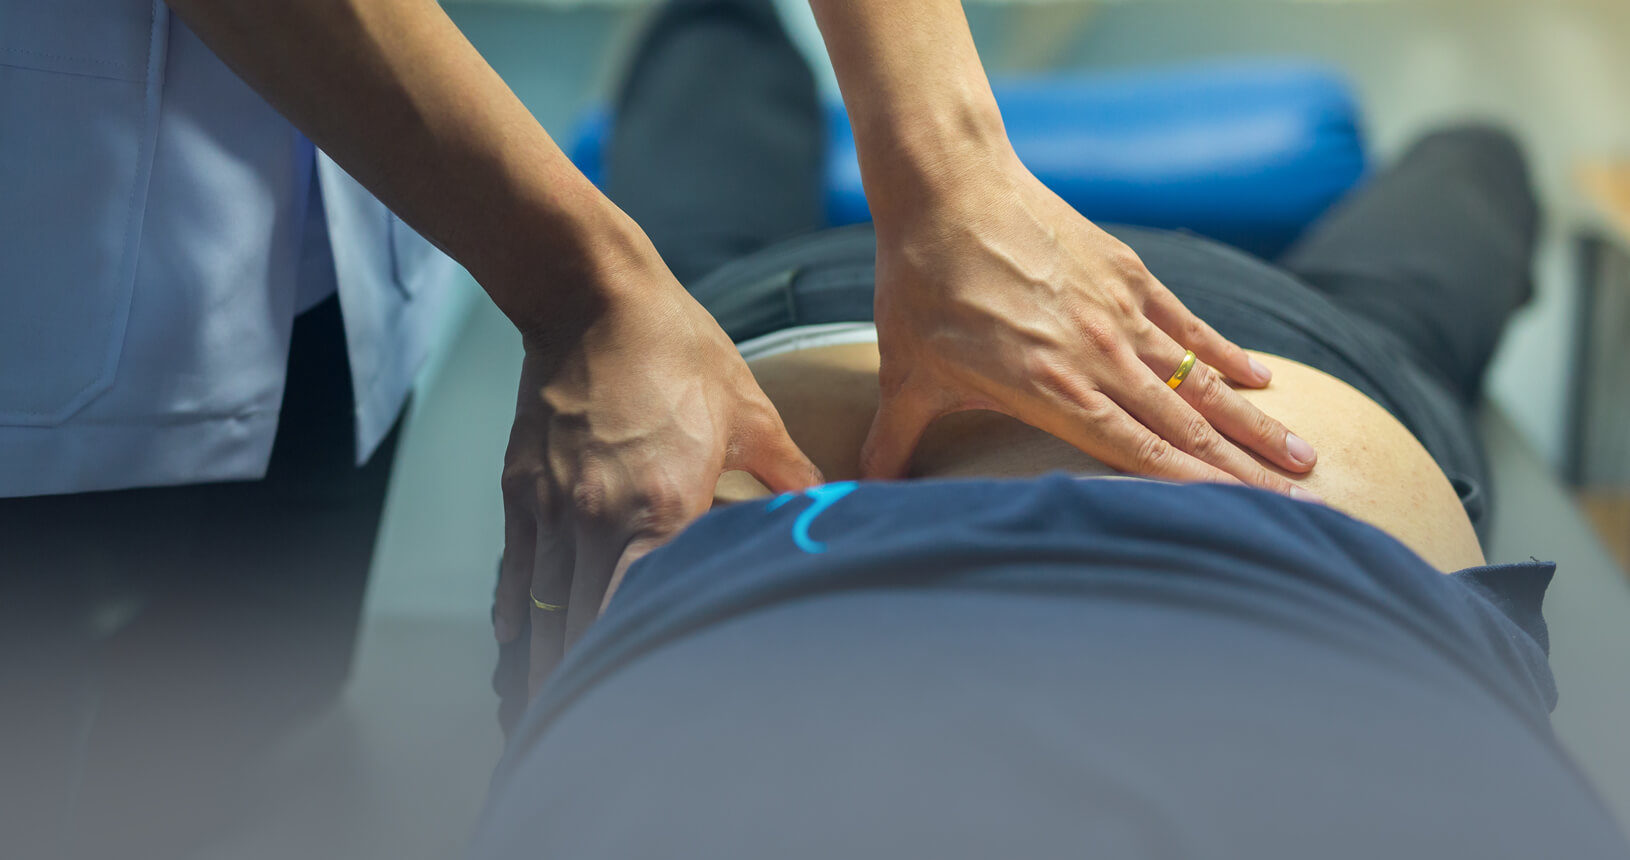 Why Is Touch Important In Physical Therapy?